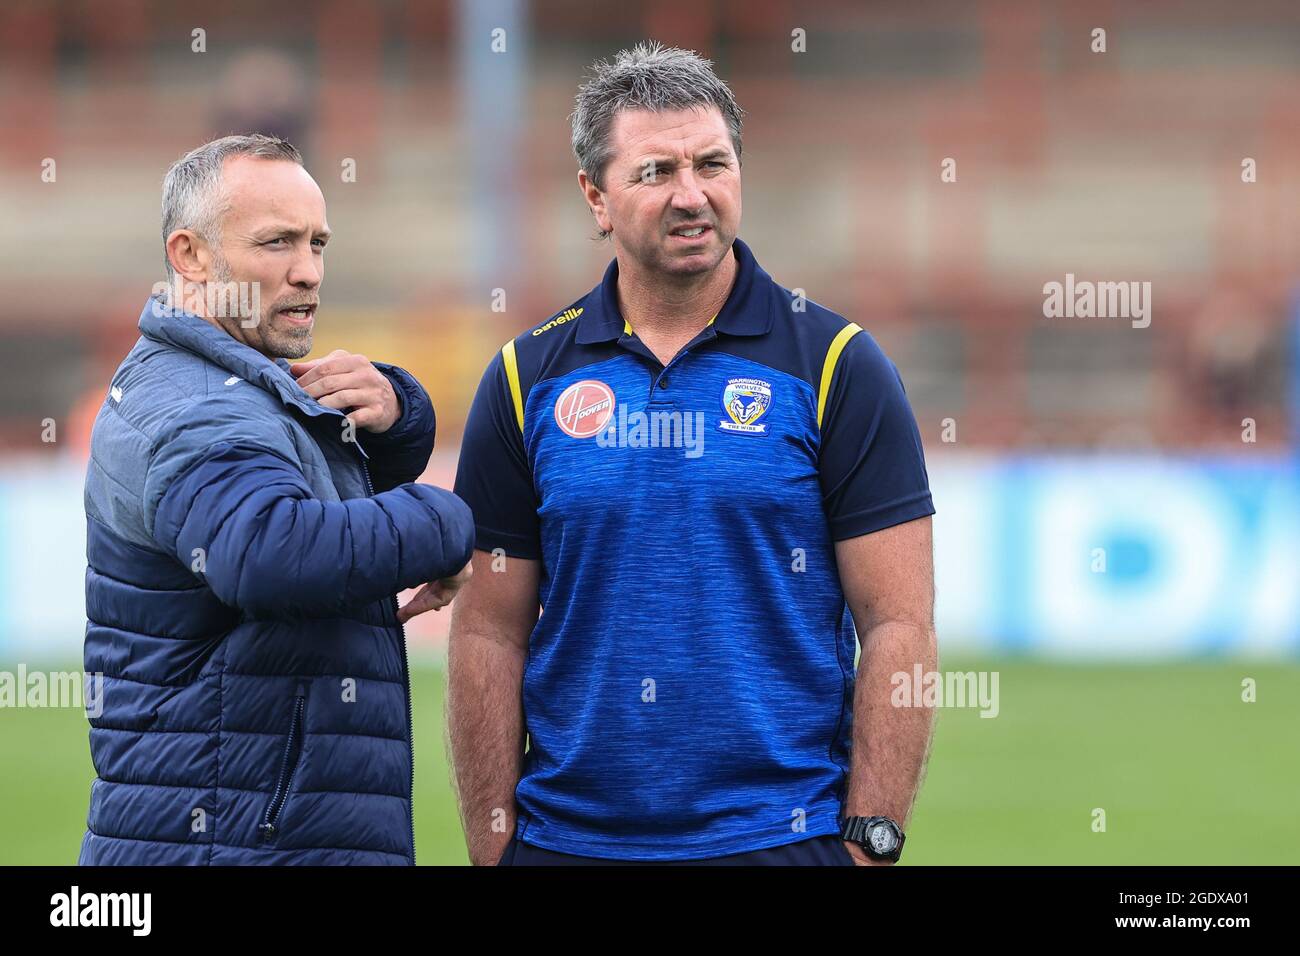 Wakefield, UK. 15th Aug, 2021. Steve Price Head Coach of Warrington Wolves and Andrew Henderson inspect the pitch in Wakefield, United Kingdom on 8/15/2021. (Photo by Mark Cosgrove/News Images/Sipa USA) Credit: Sipa USA/Alamy Live News Stock Photo